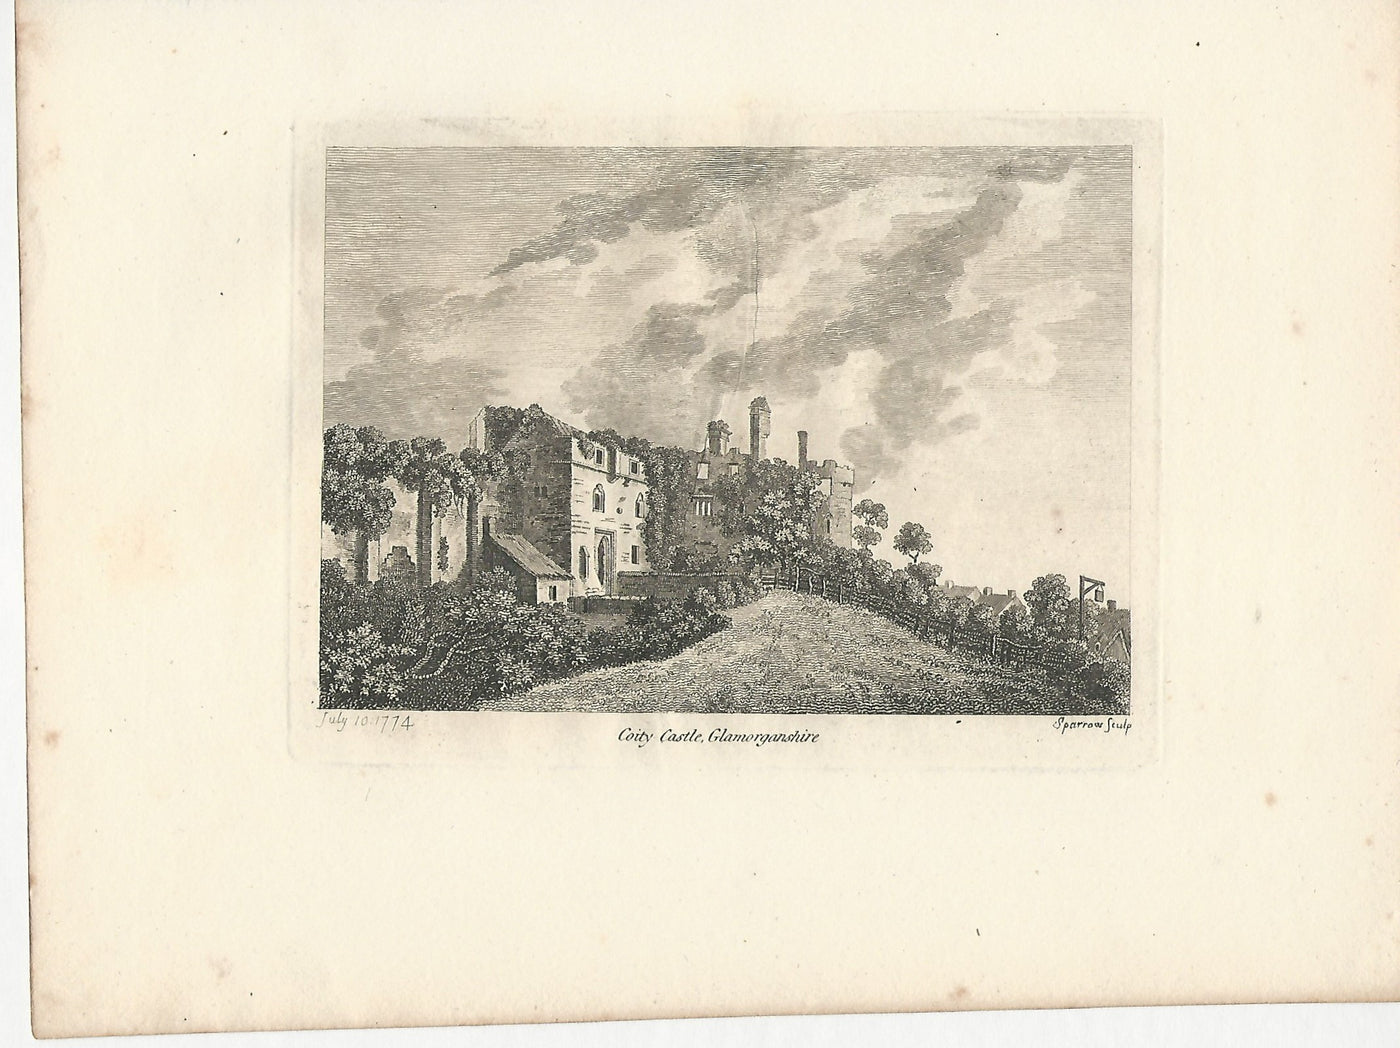 Coity Castle Glamorganshire Wales antique print 1774